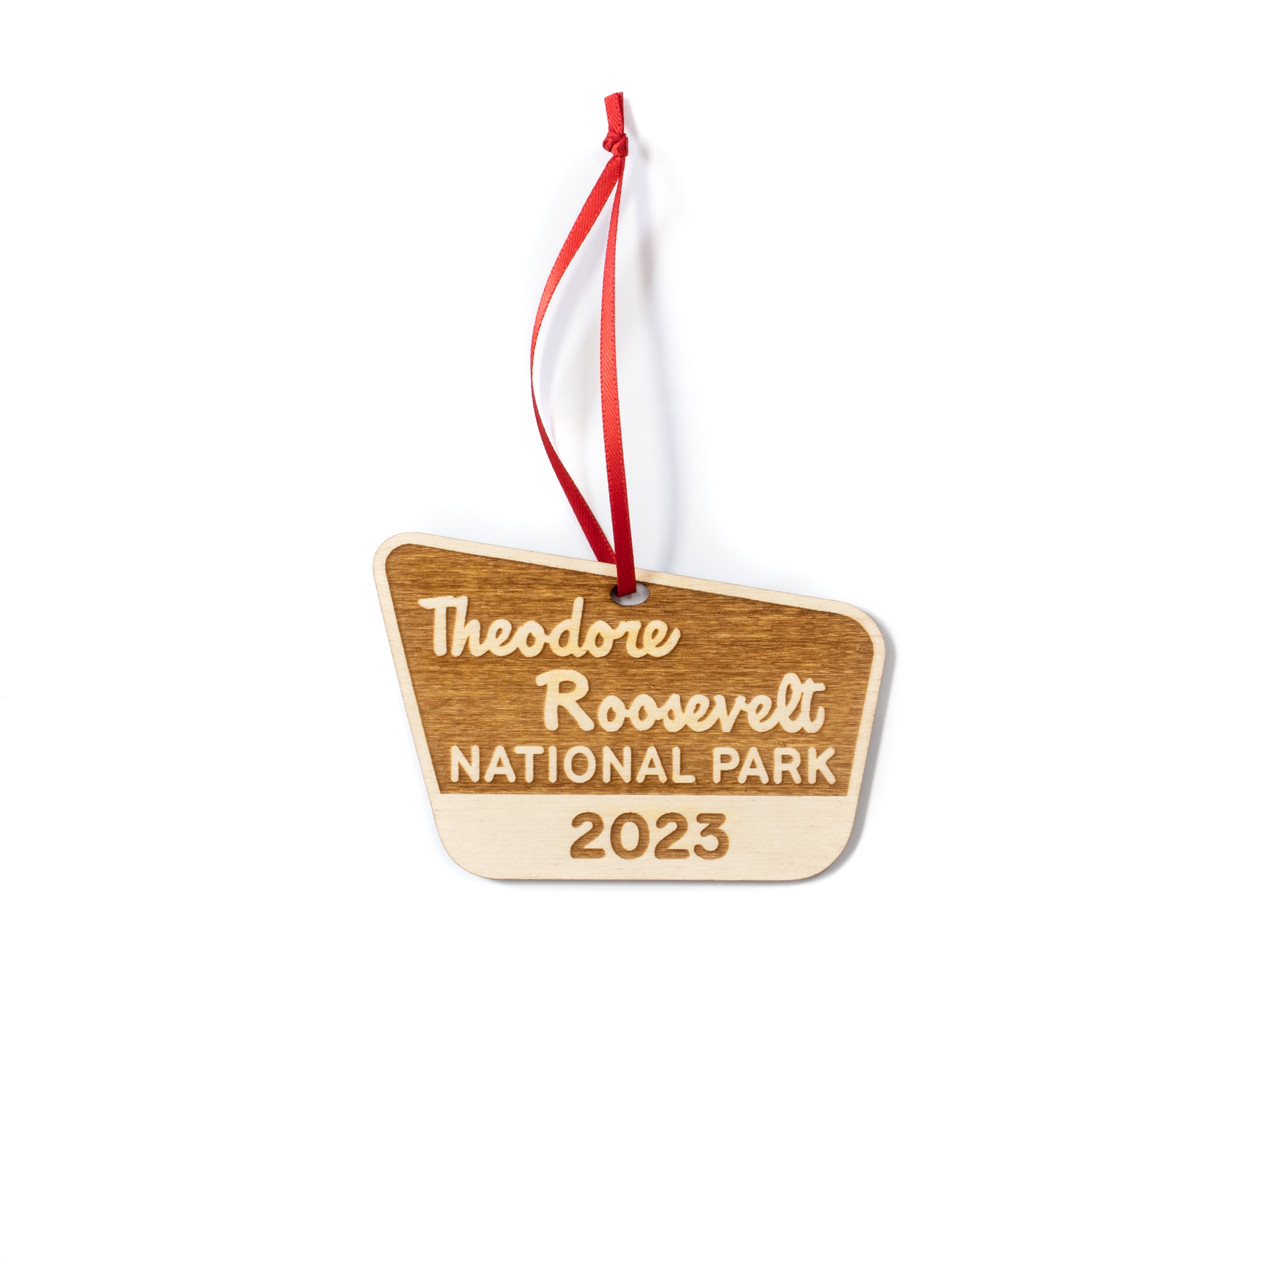 A charming engraved wooden ornament of Theodore Roosevelt National Park: A perfect souvenir to remember the stunning landscapes and natural beauty of the park.